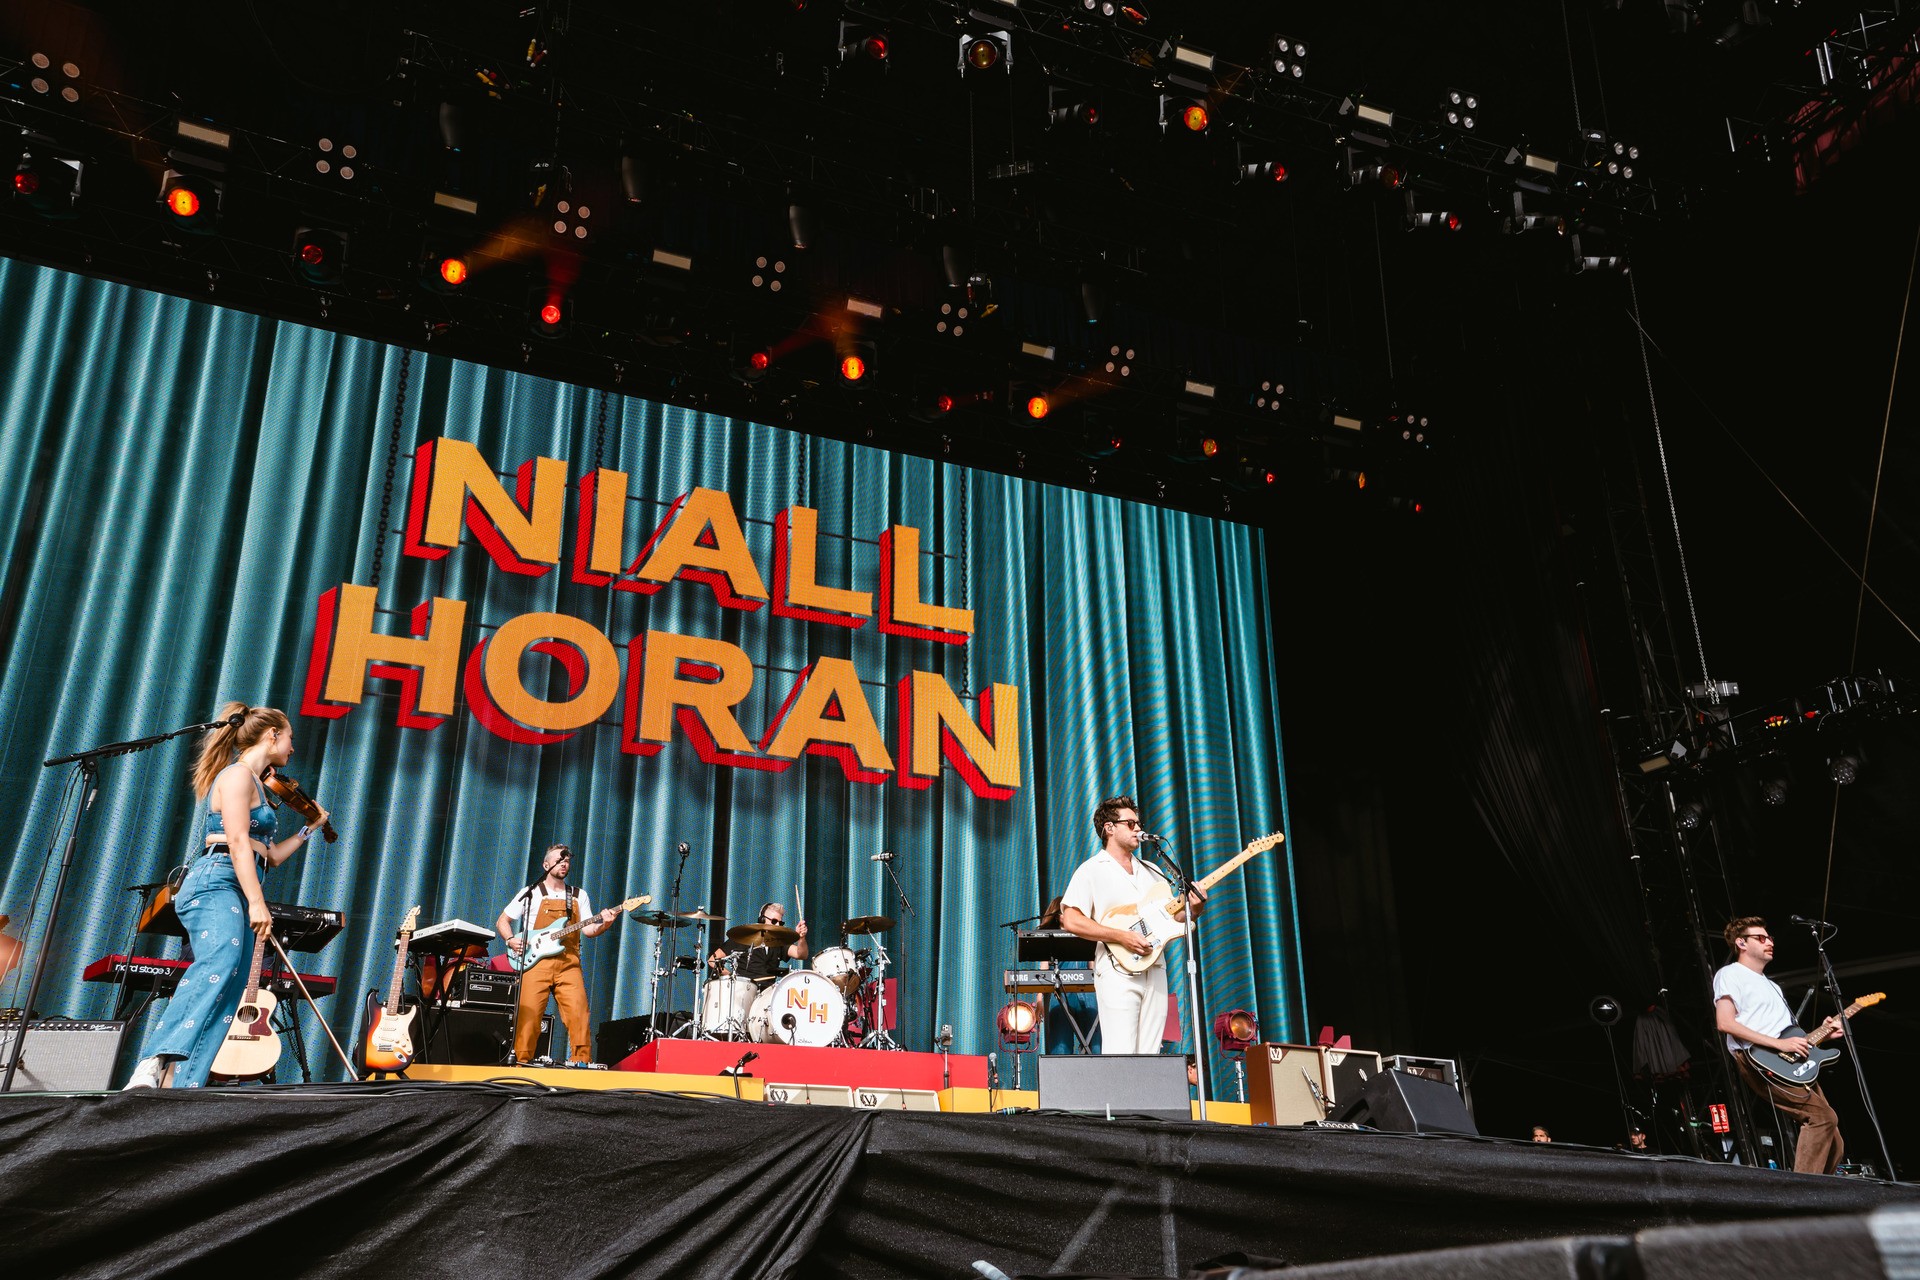 Niall Horan gave a shoutout to Lewis Capaldi after the Scot's Glastonbury performance. (Image: TRNSMT)